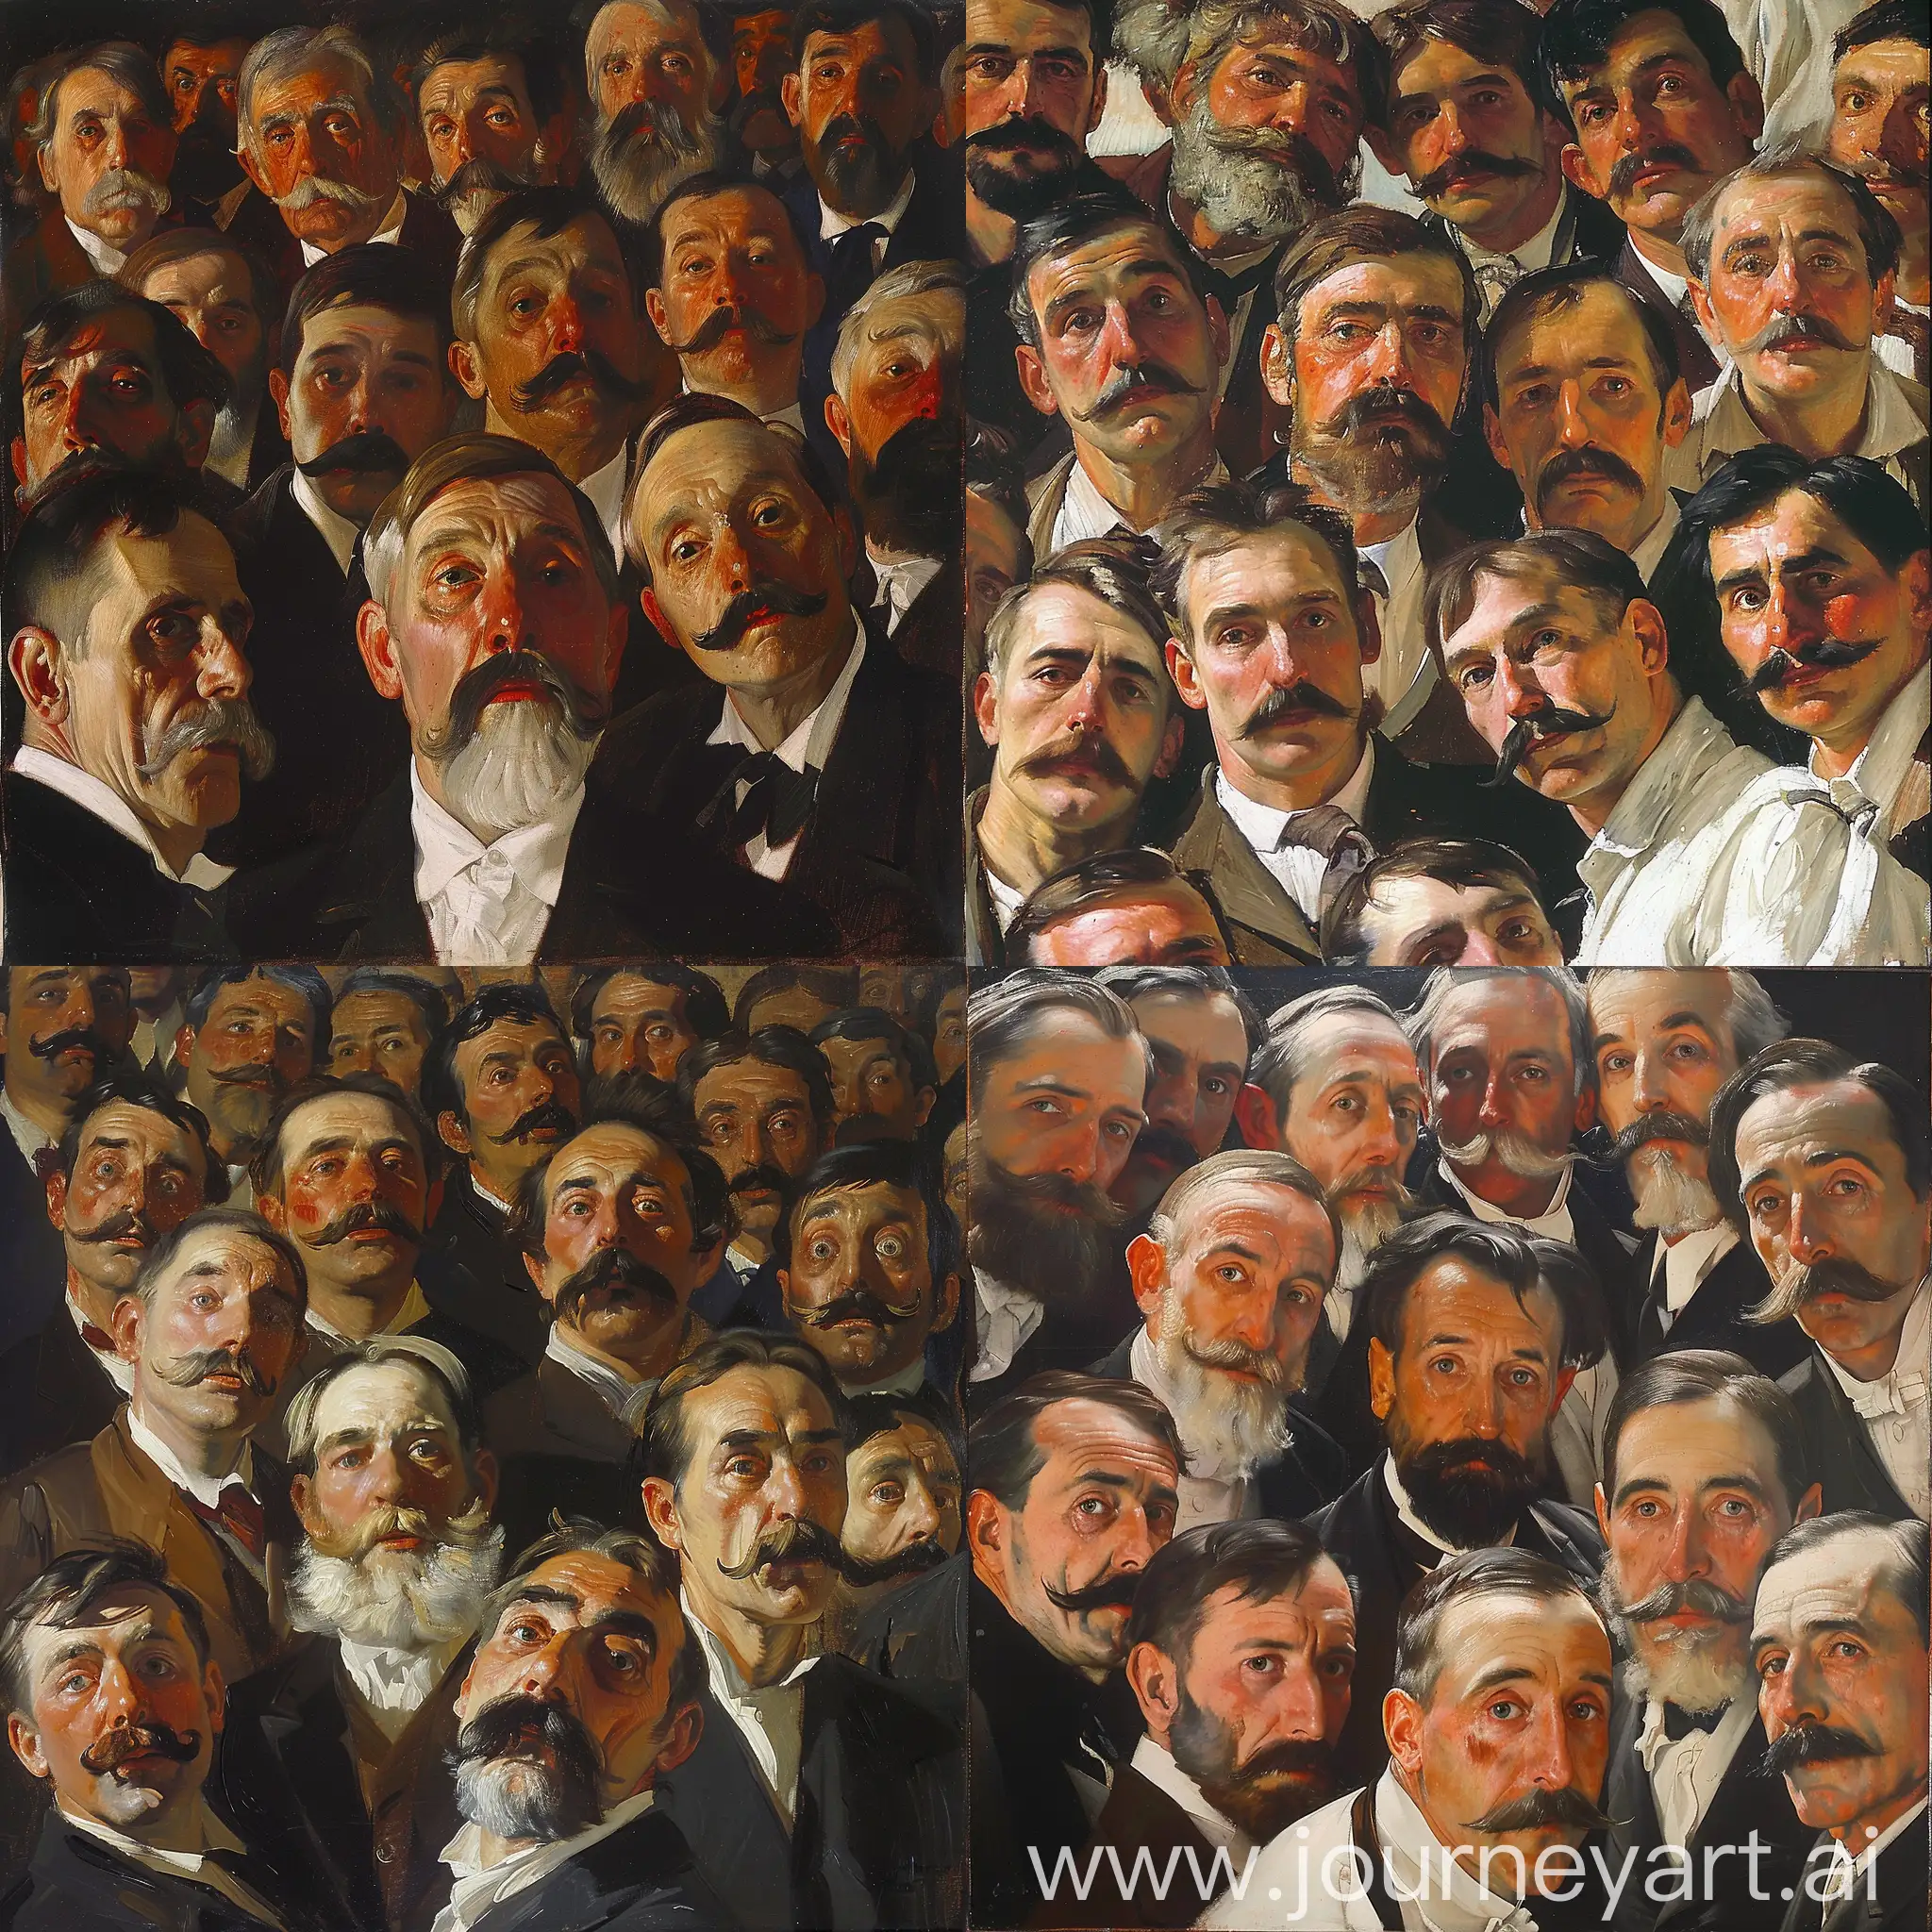 a painting of a group of men, many faces, only faces, by Robert Henri, santiago rusinol, joaquin sorolla, by Emile Auguste Carolus-Duran, joaquin sorolla ) ), by John Singer Sargent, john signer sargent, style of anders zorn, sargent, john singer sargent style, sargent and leyendecker, by Marie Krøyer, herbert james draper, only faces, faces, 